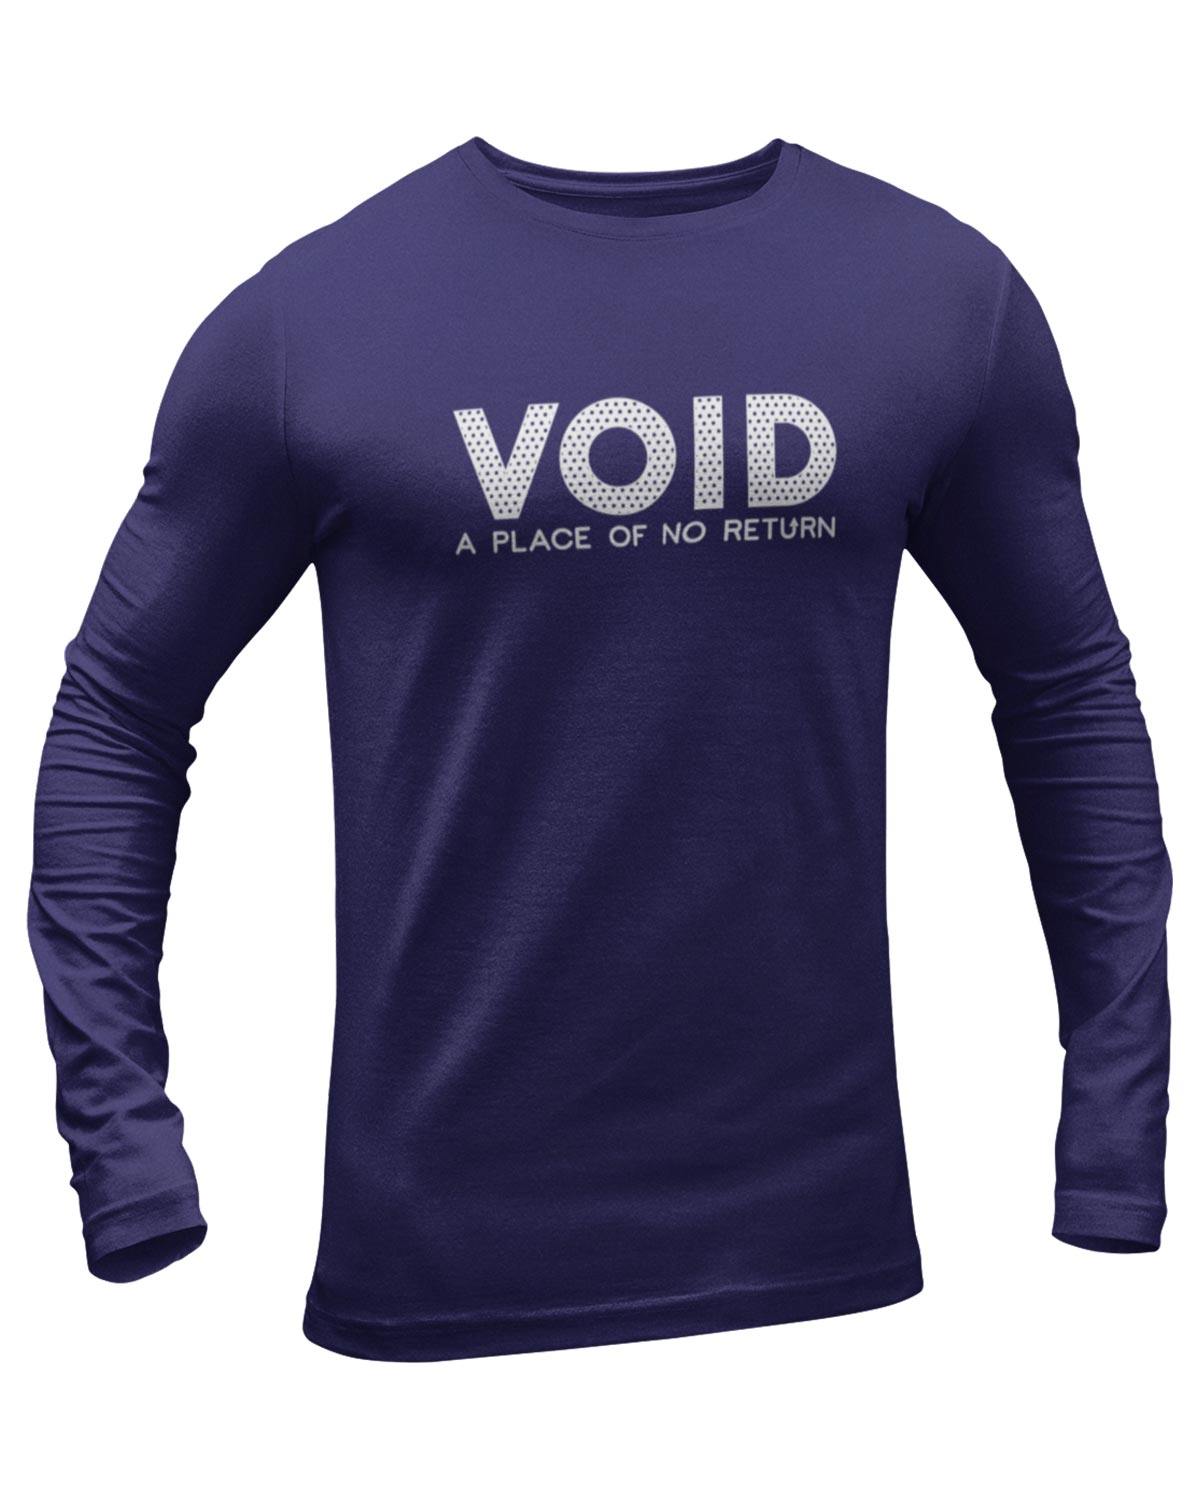 Void A Place Of No Return Full Sleeve Geek T-Shirt